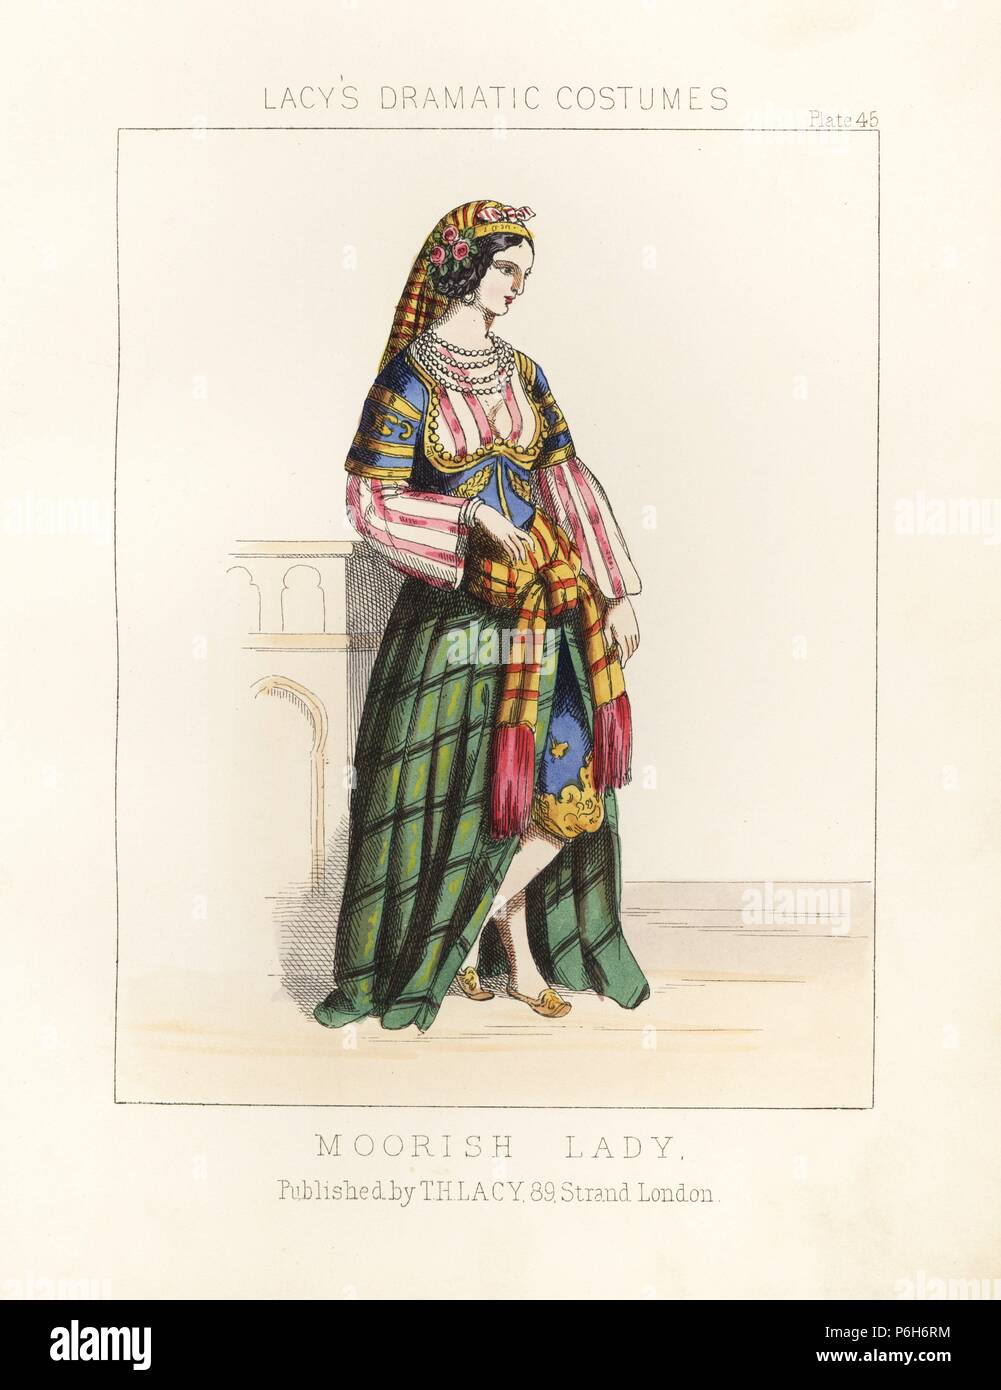 Moorish lady, 19th century. Handcoloured lithograph from Thomas Hailes Lacy's "Female Costumes Historical, National and Dramatic in 200 Plates," London, 1865. Lacy (1809-1873) was a British actor, playwright, theatrical manager and publisher. Stock Photo